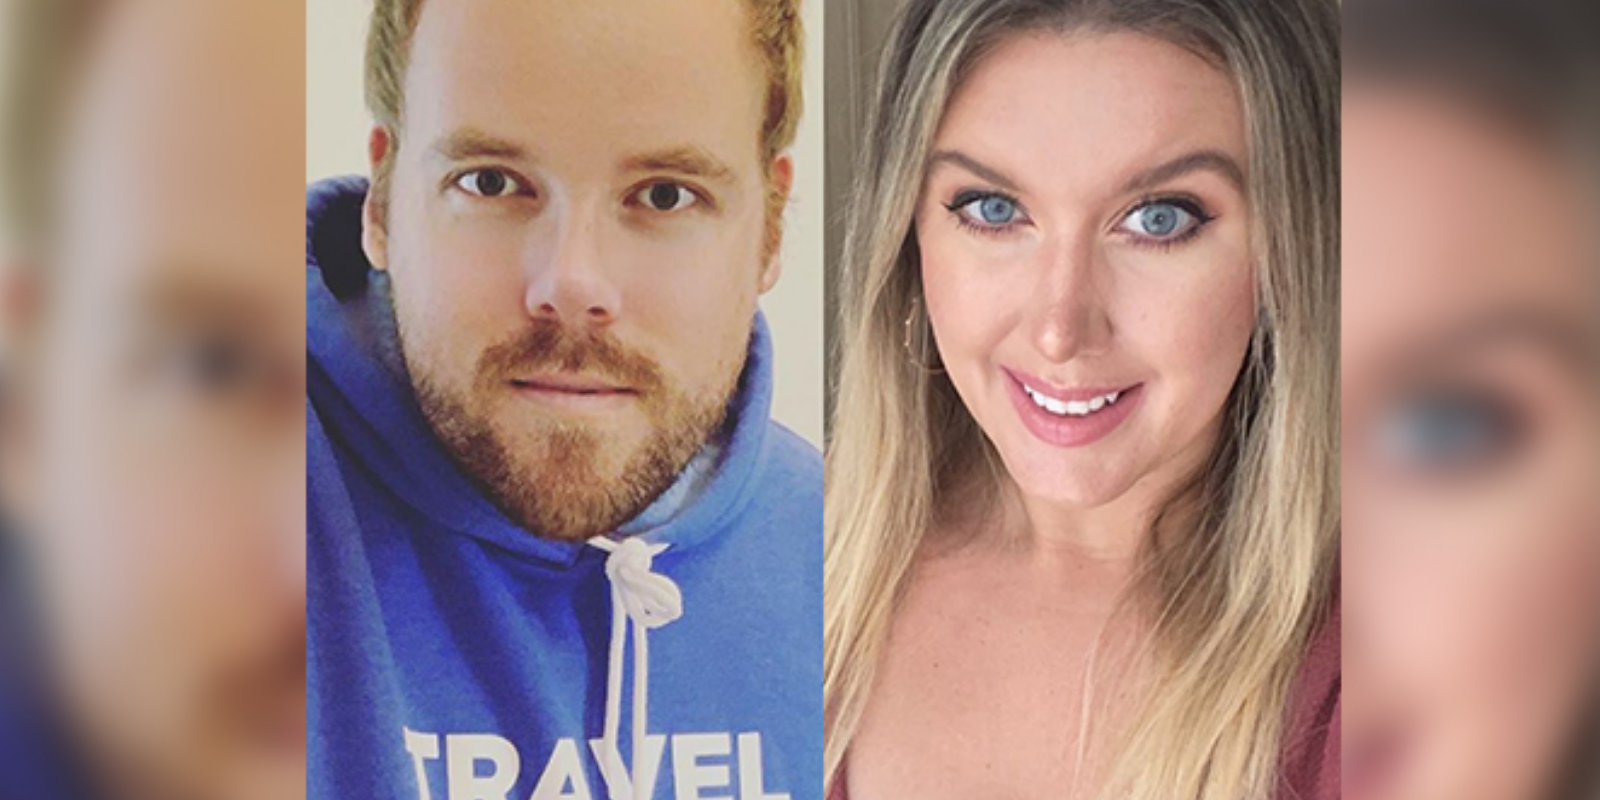 Split image of Cortney-Andy-90-Day-Fiance with Andy smirking and Cortney smiling